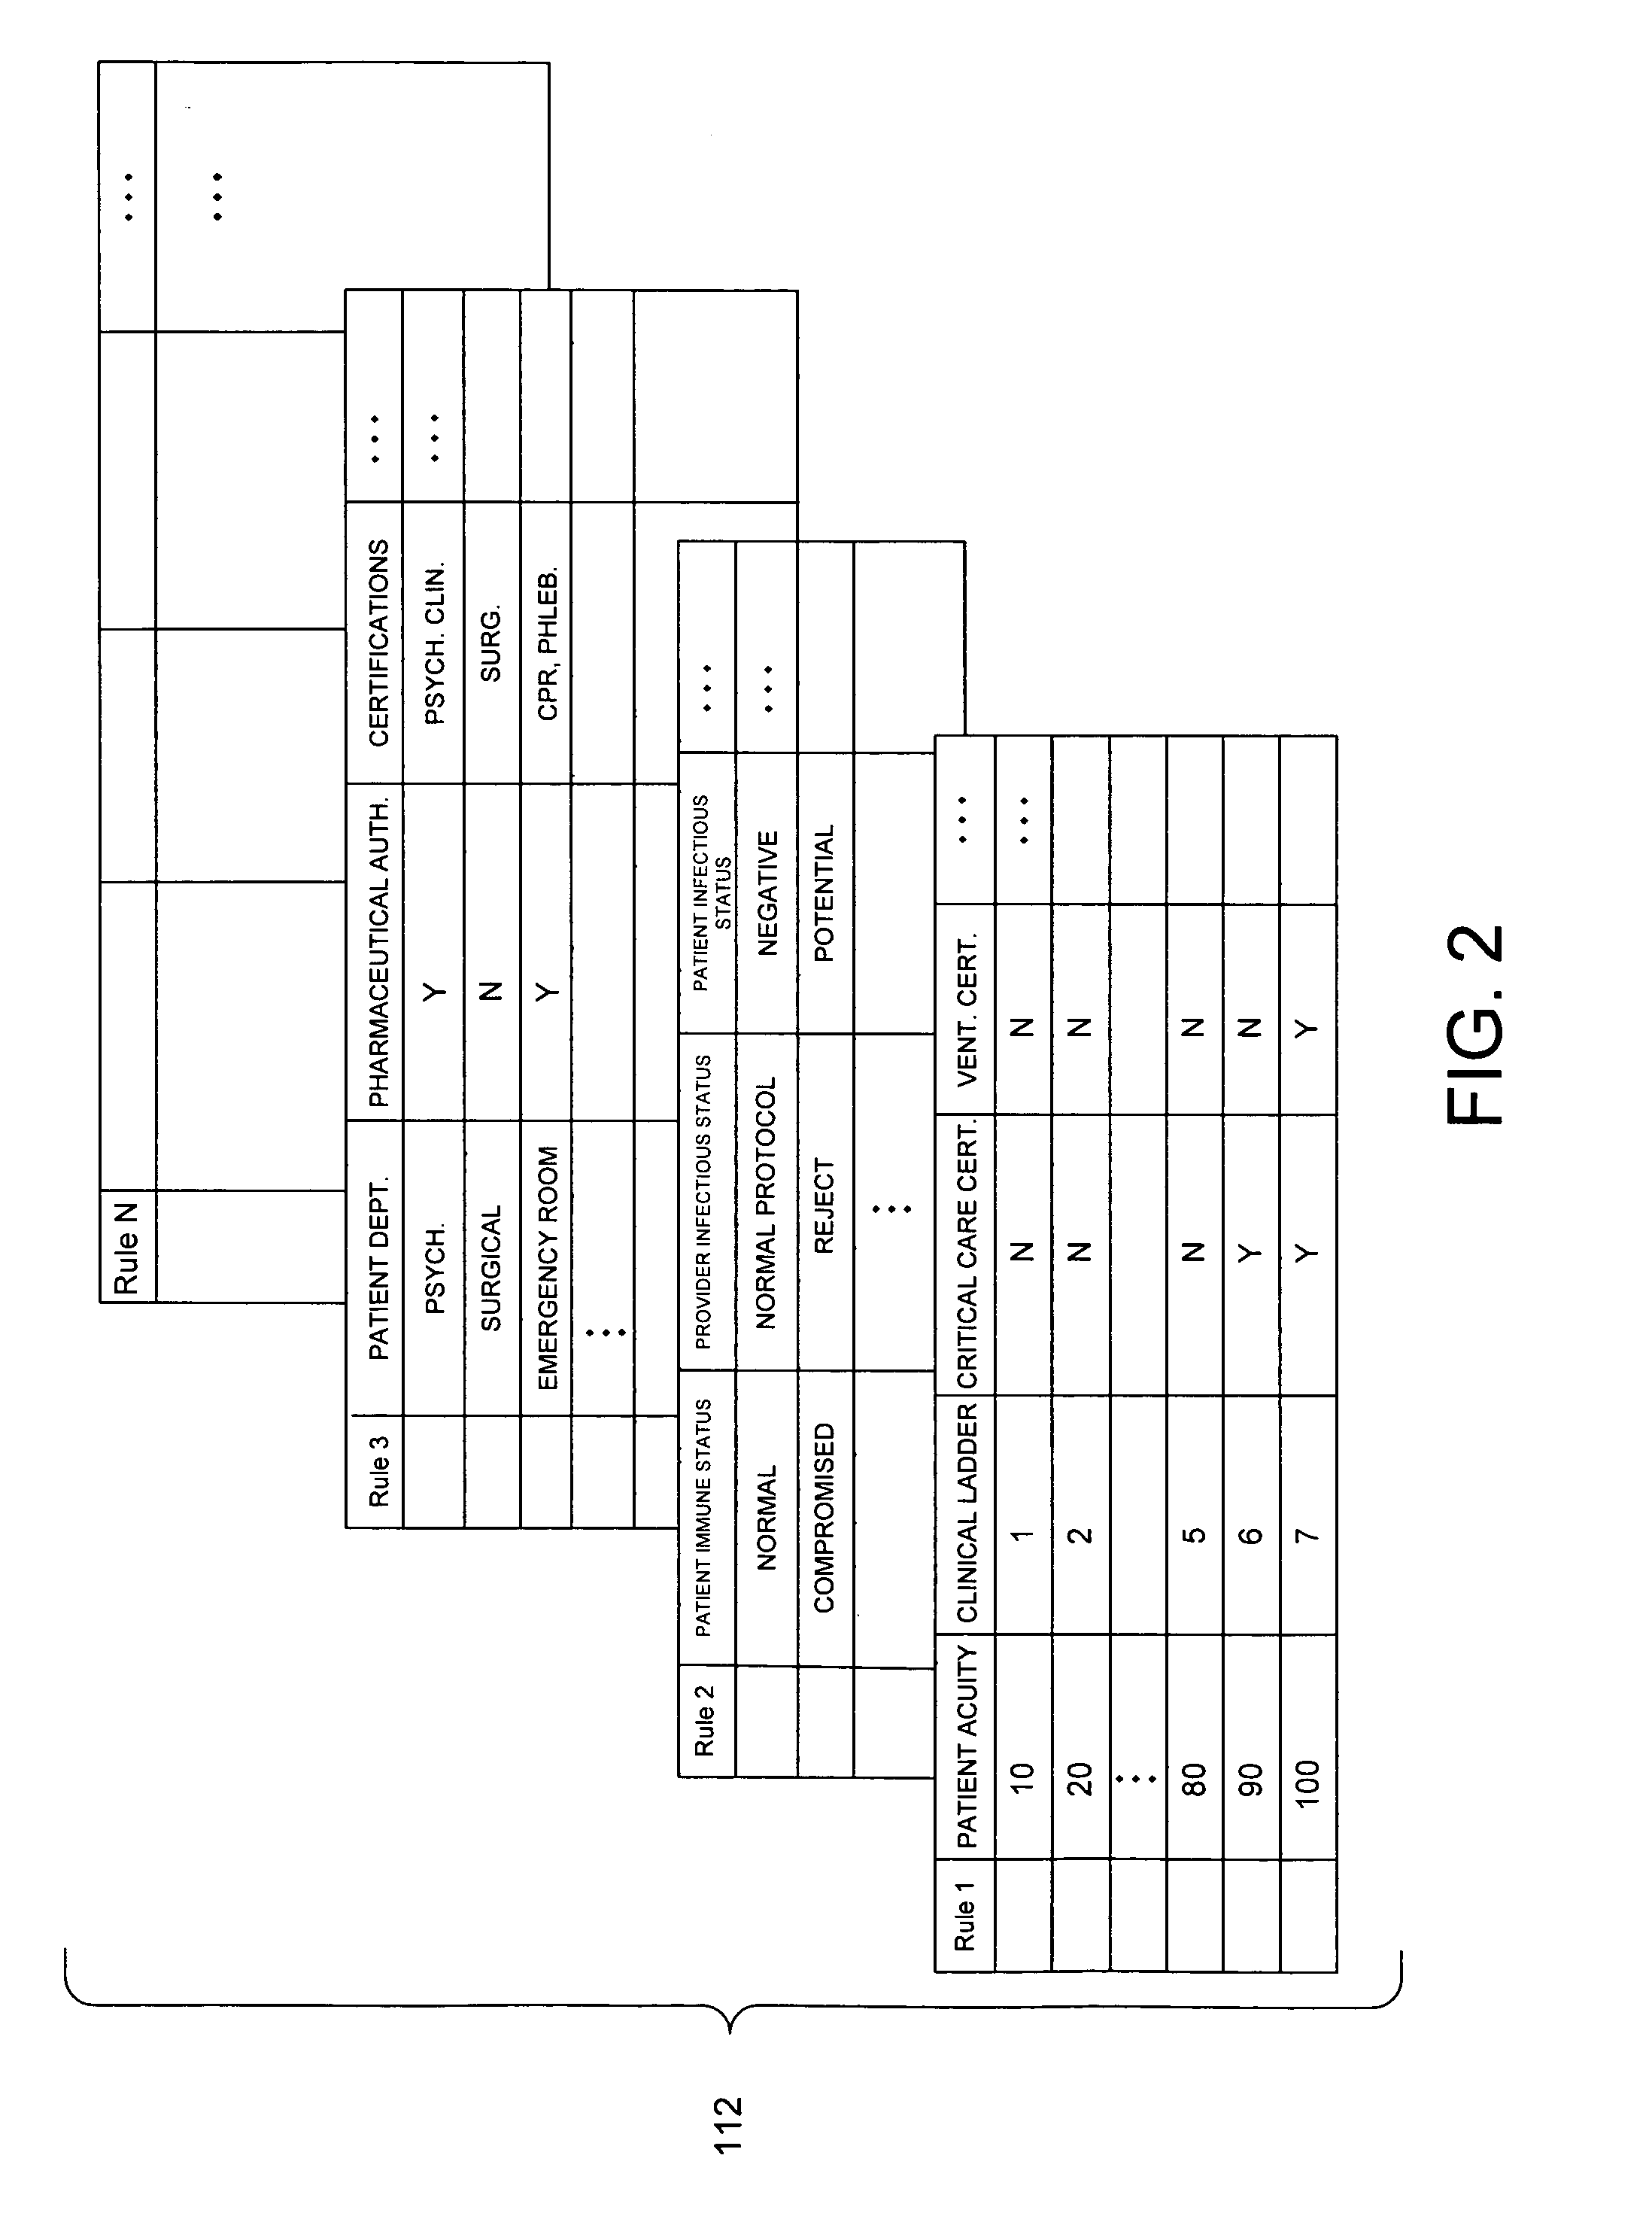 System and method for automatically generating evidence-based assignment of care providers to patients